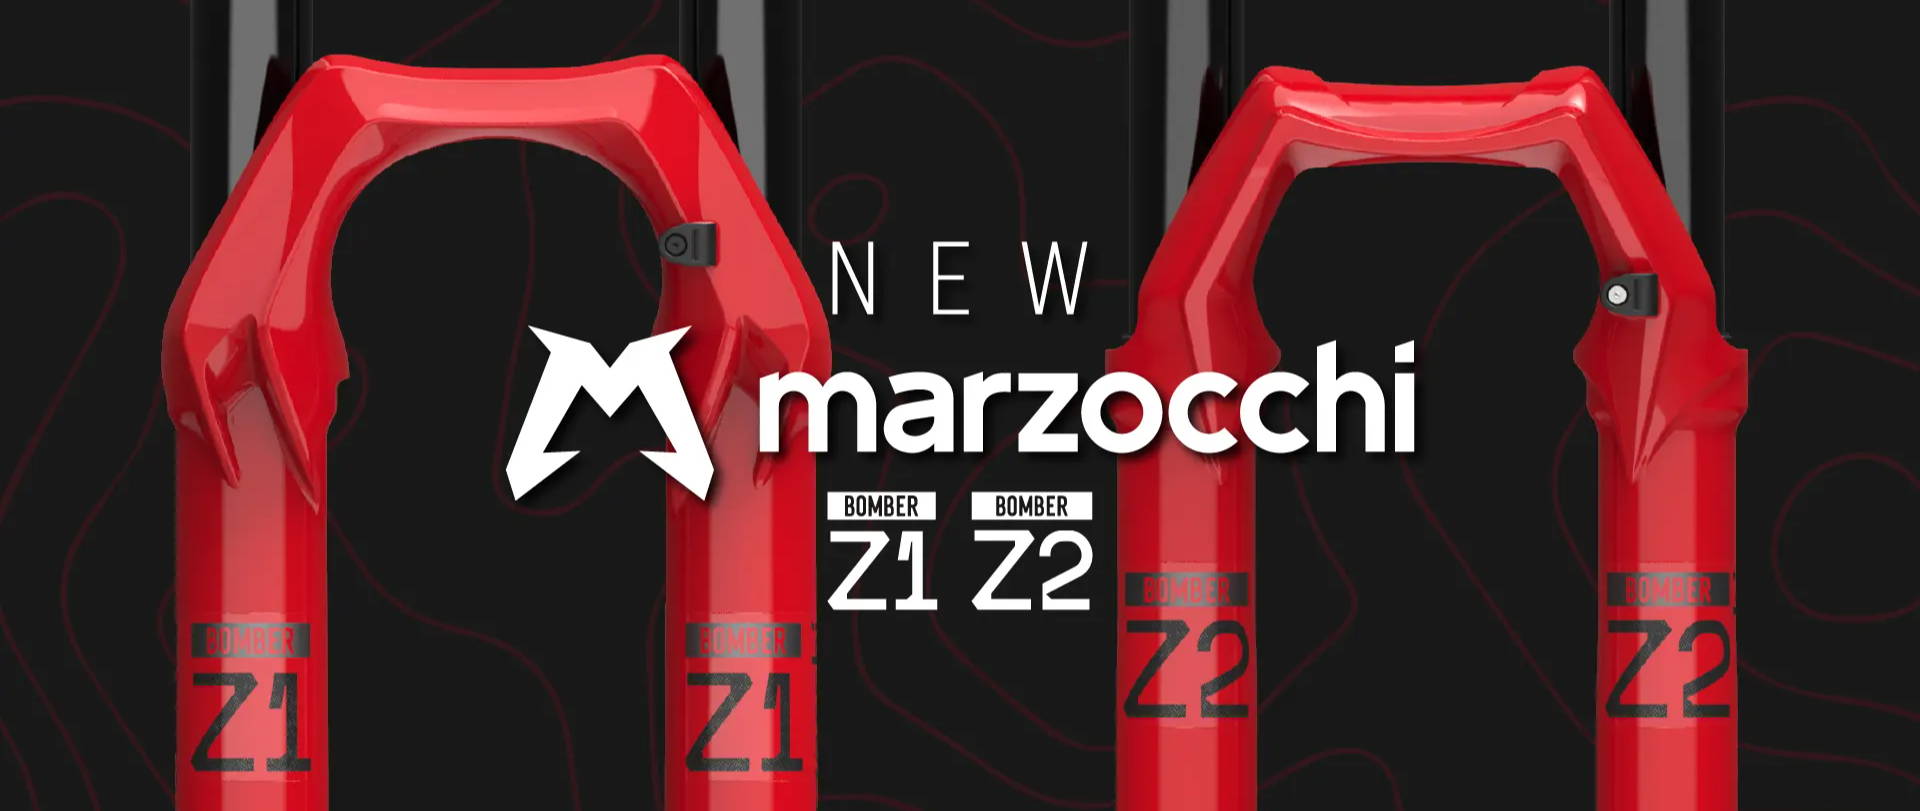 Marzocchi Bomber Z1 and Z2 Mountain Bike Forks against black background